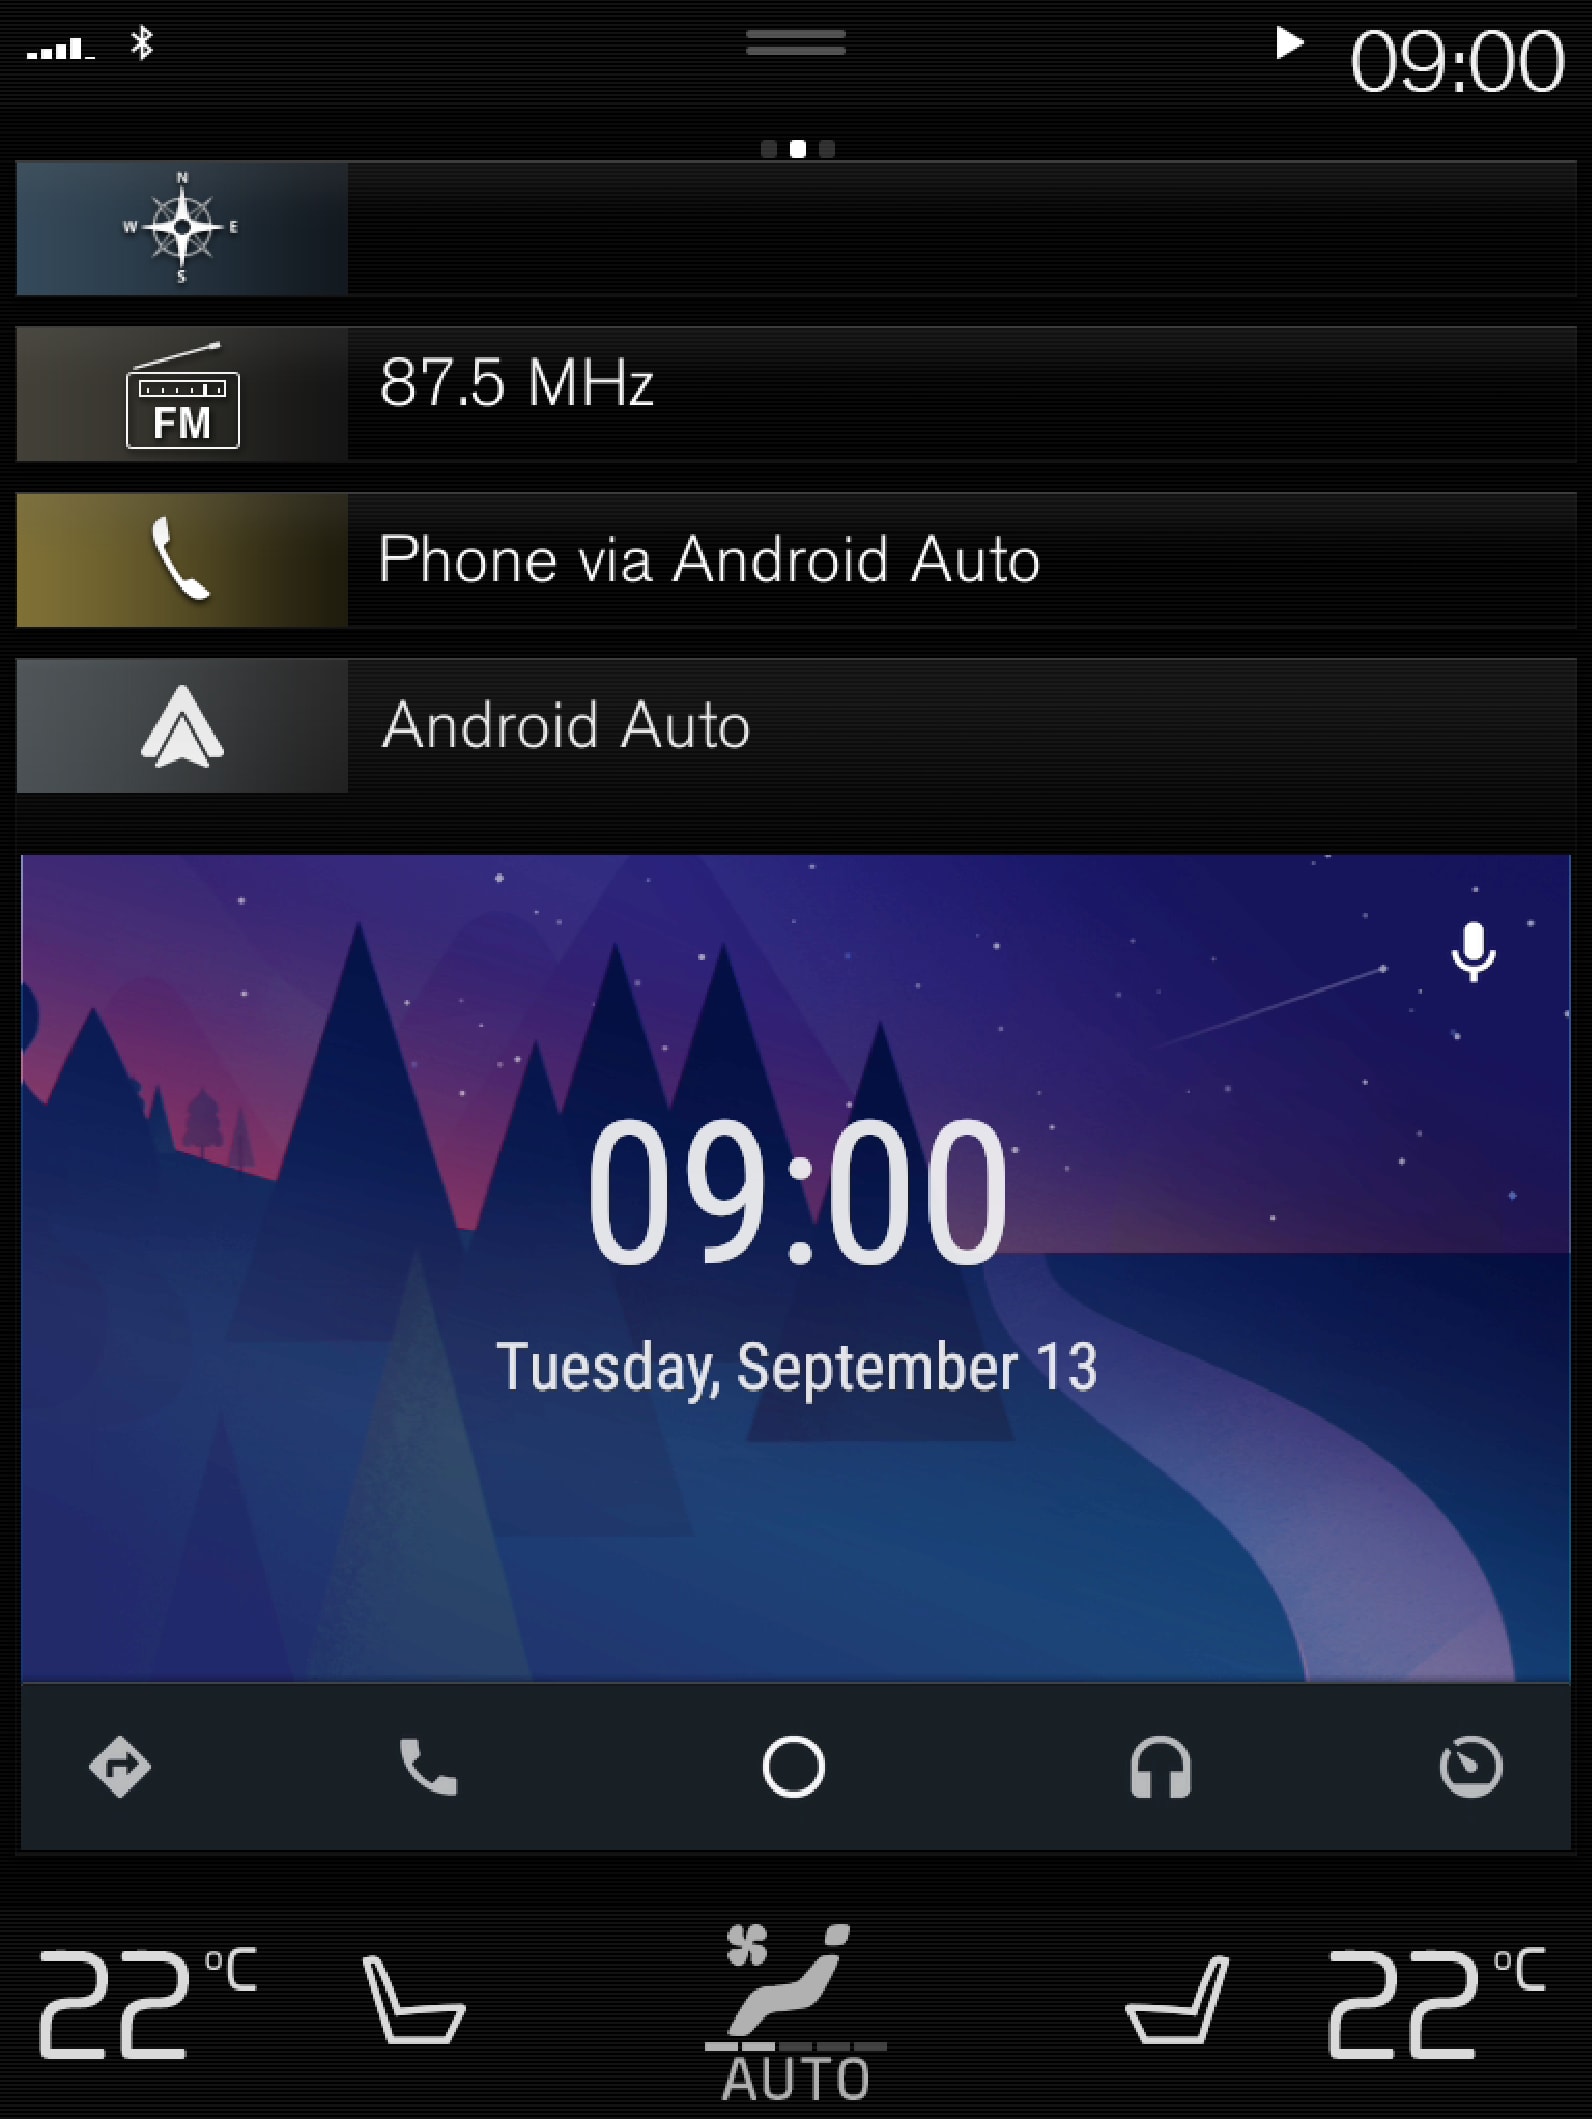 16w46 - P5 - Support site - Android Auto Clock View